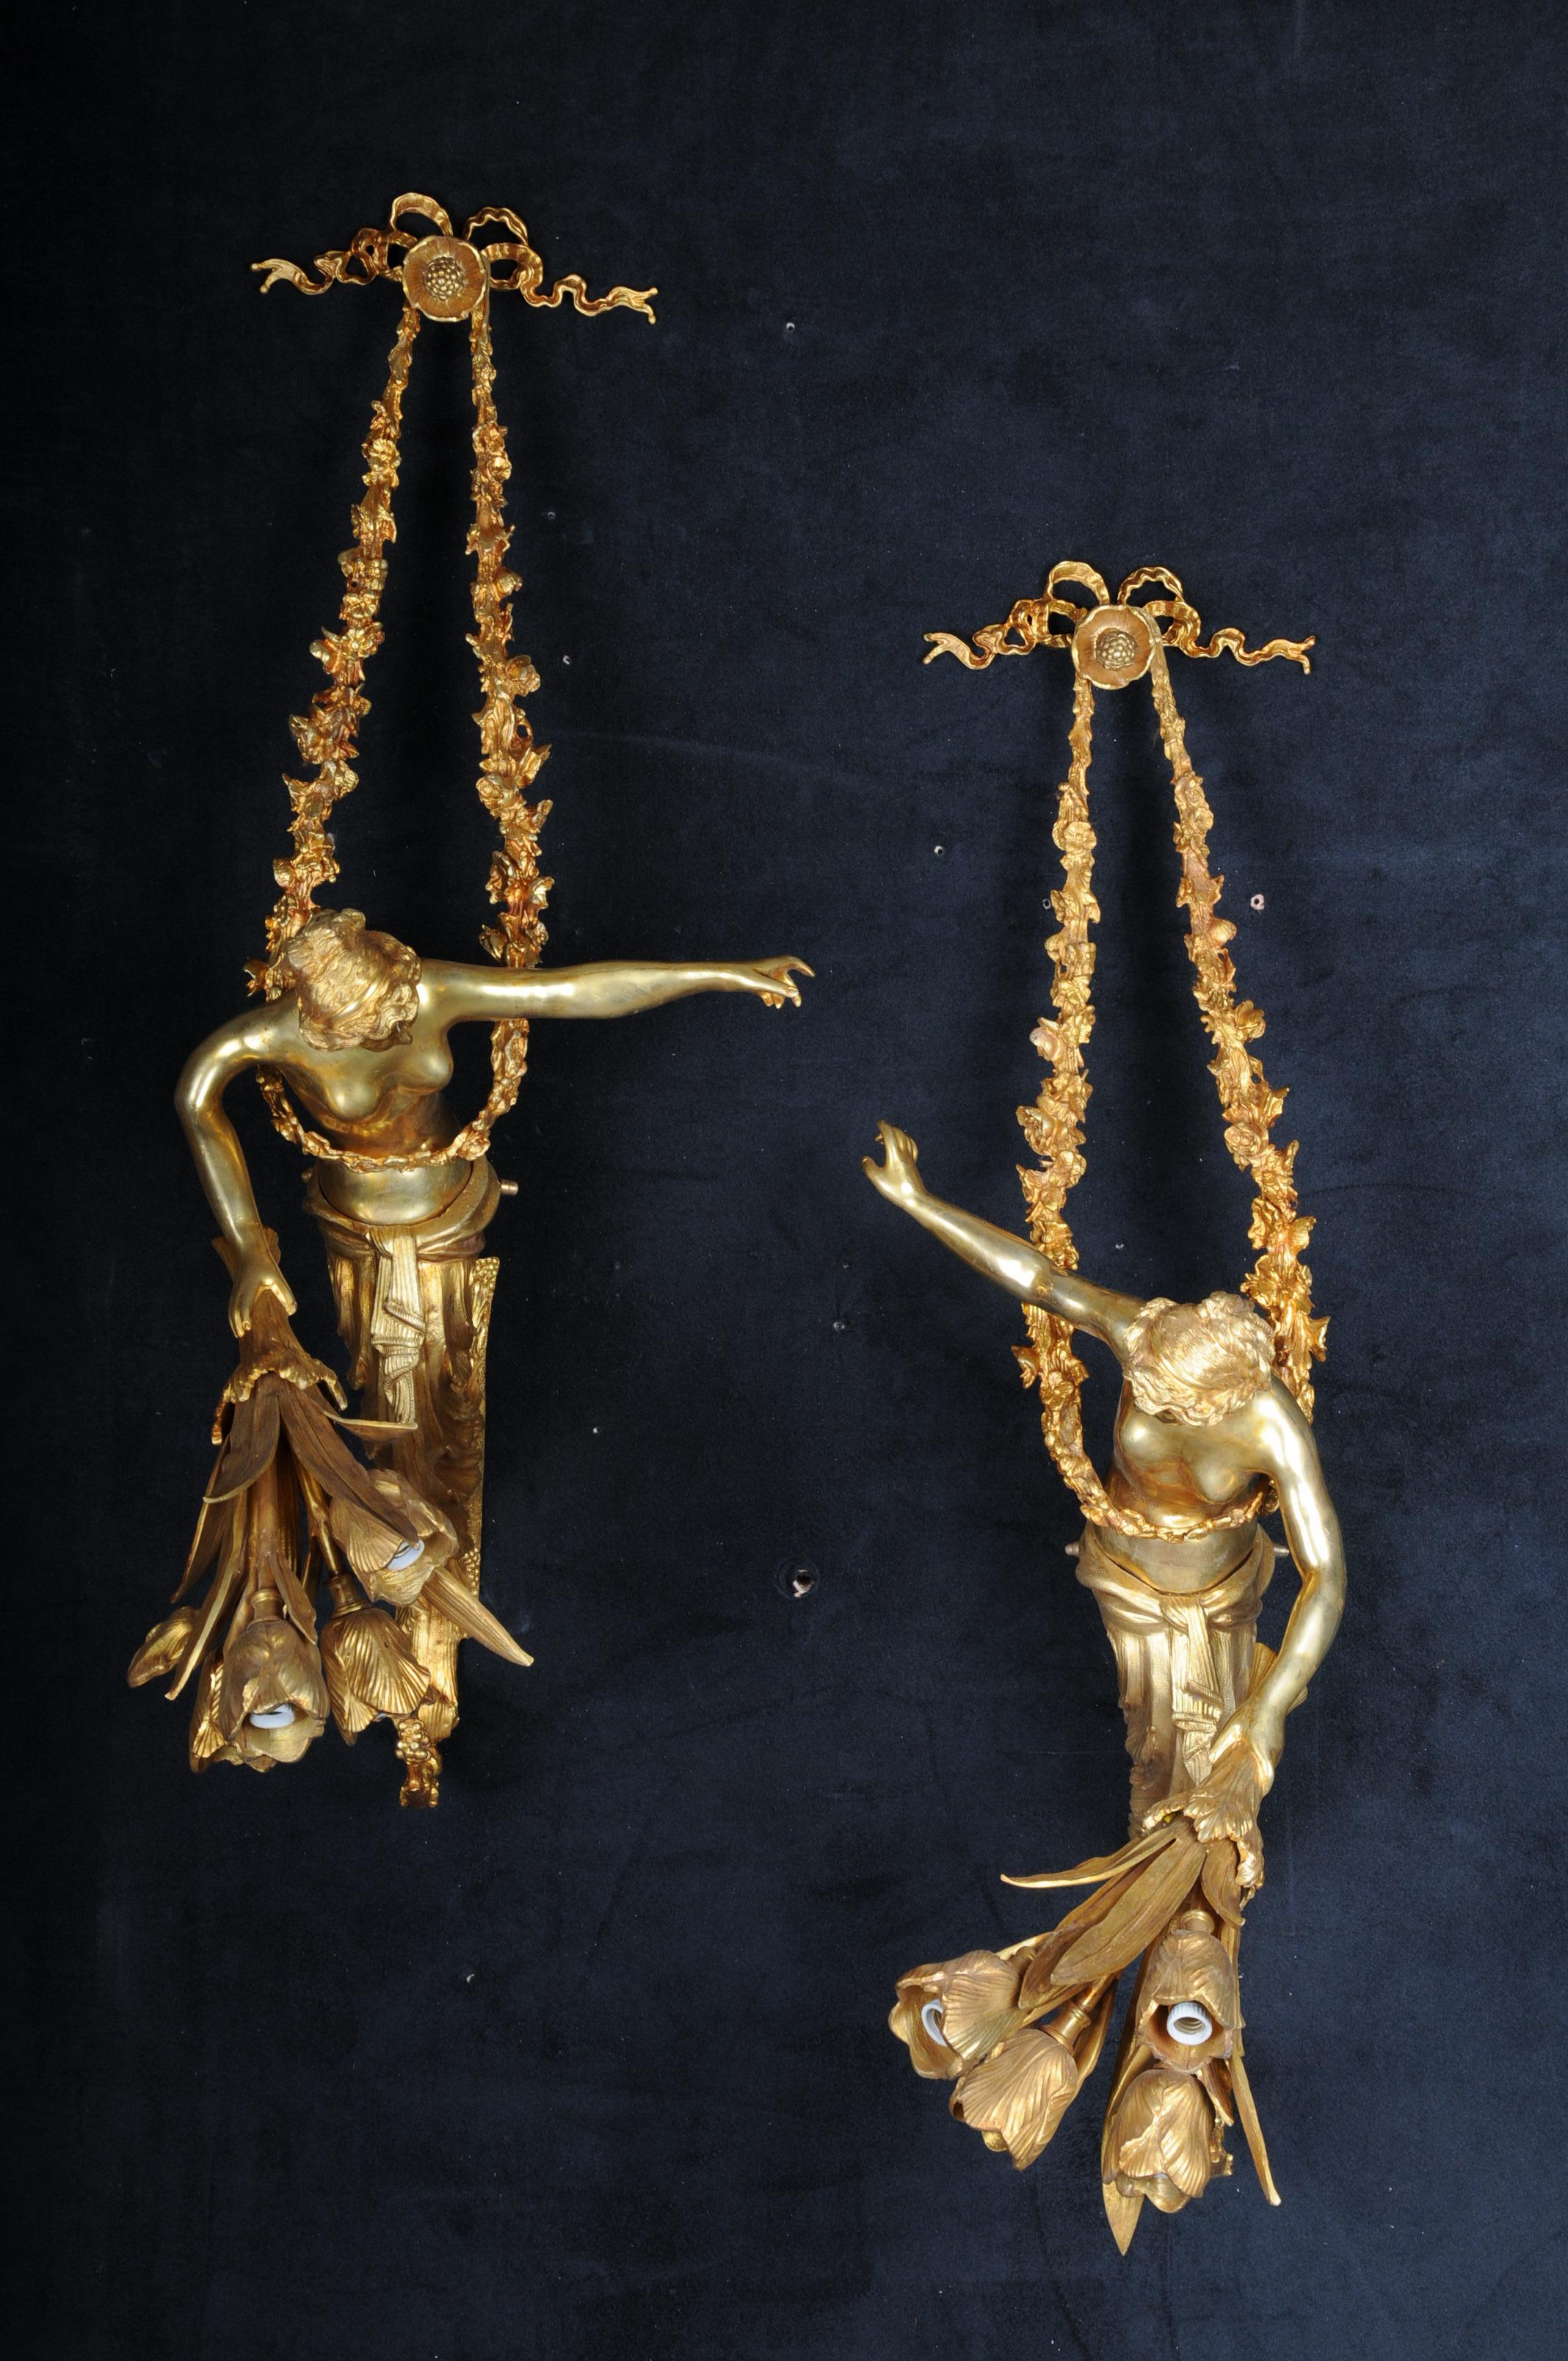 Pair of unique French sconces, gilt bronze, Paris

Solid bronze/brass, finely chased and gilded. Extremely decorative wall sconces, each with 4 sockets, electrified.

Floral garlands surround a nymph who is facing each other. The base and